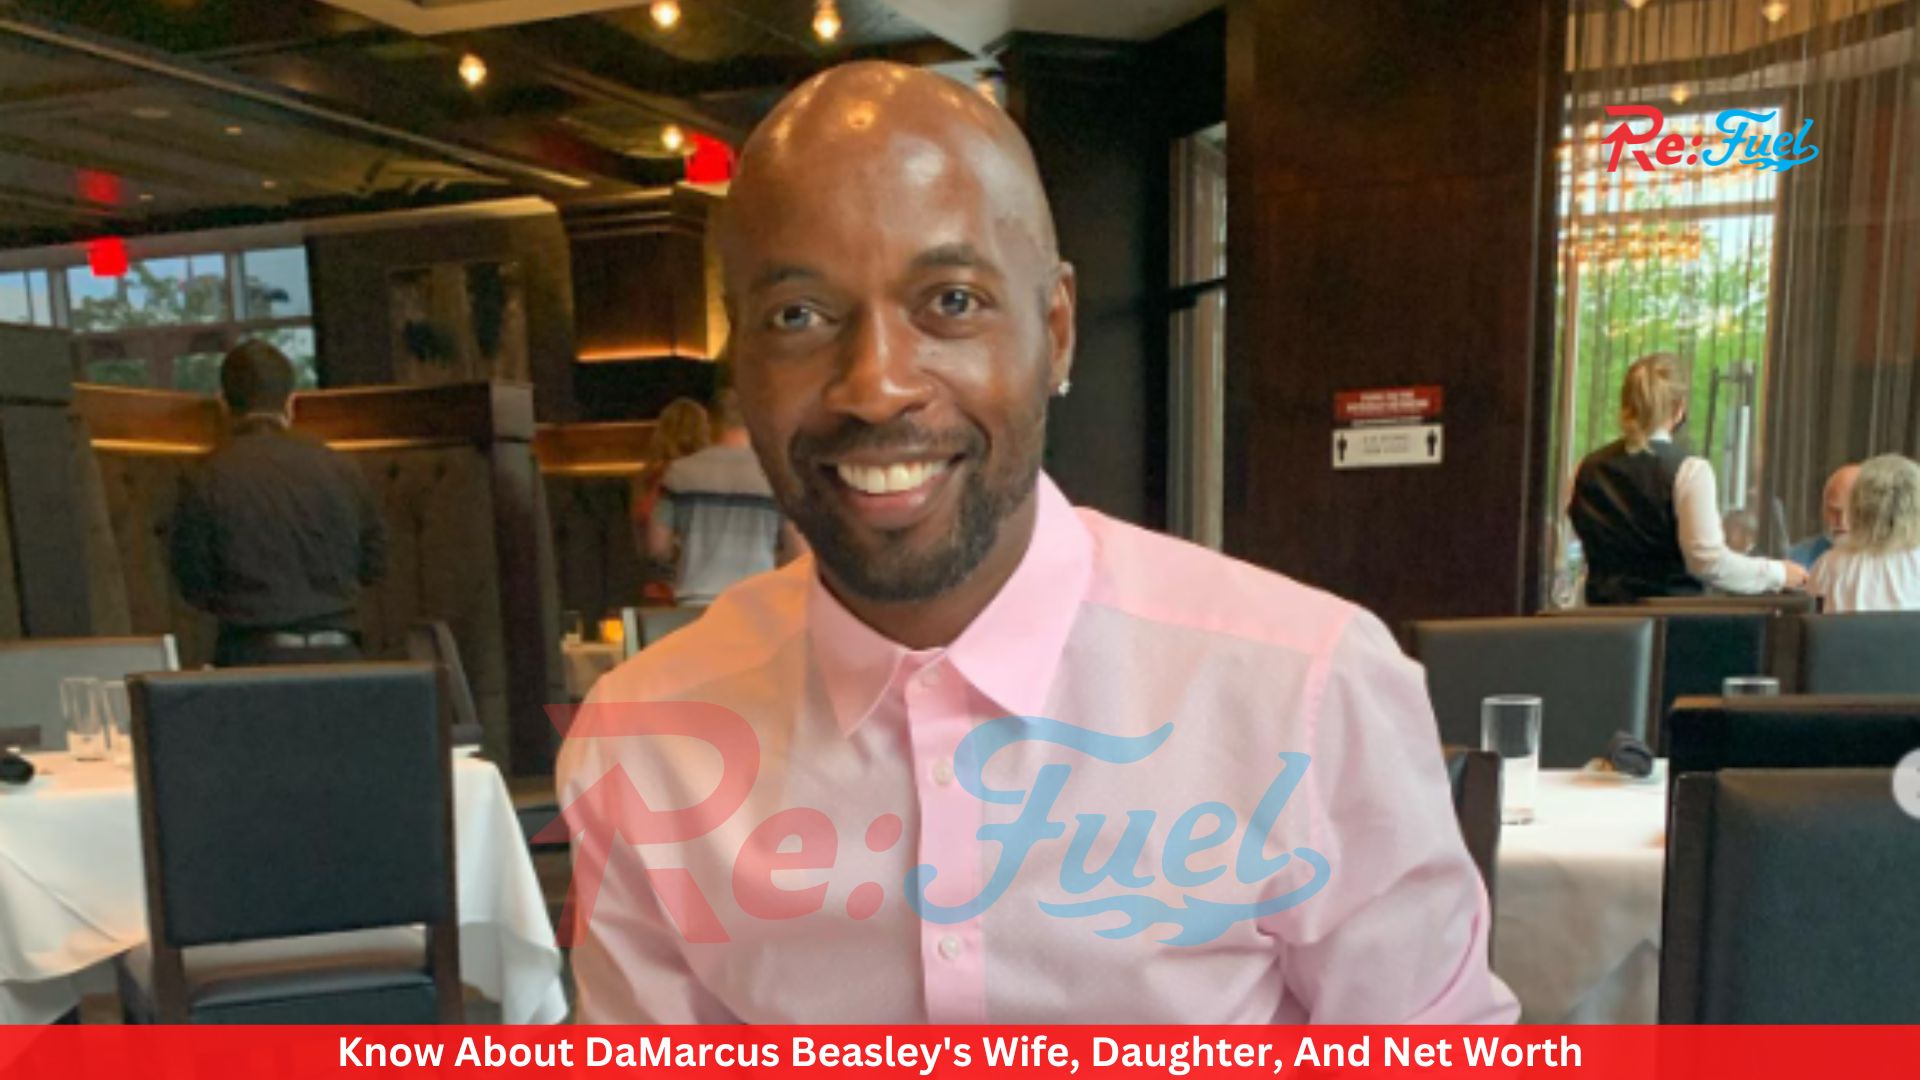 Know About DaMarcus Beasley's Wife, Daughter, And Net Worth